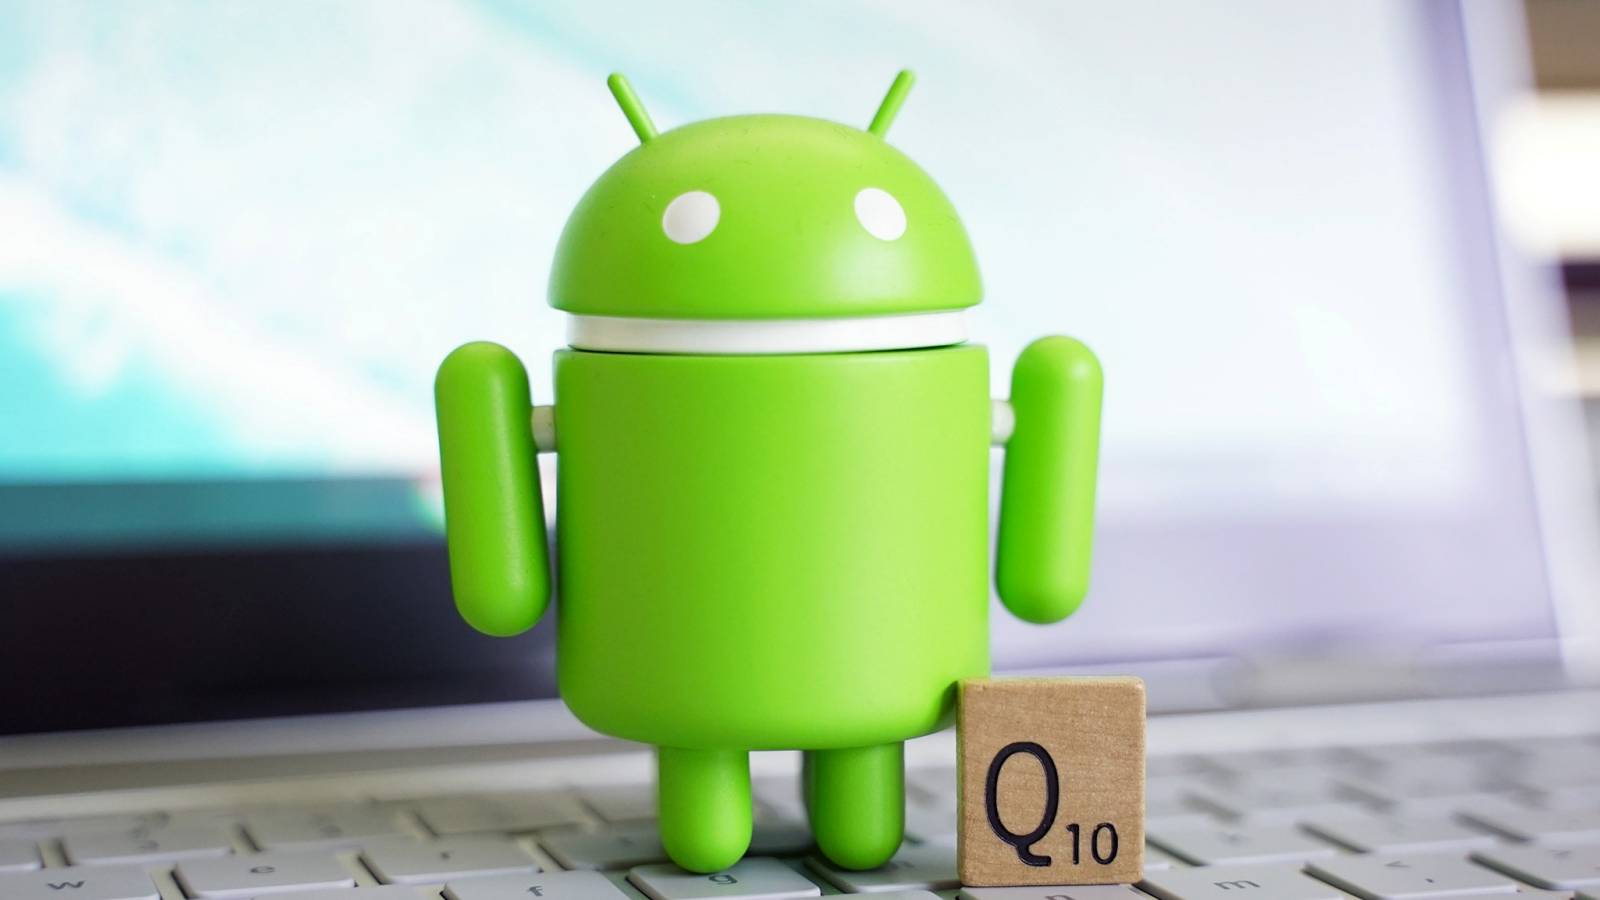 Android Q special